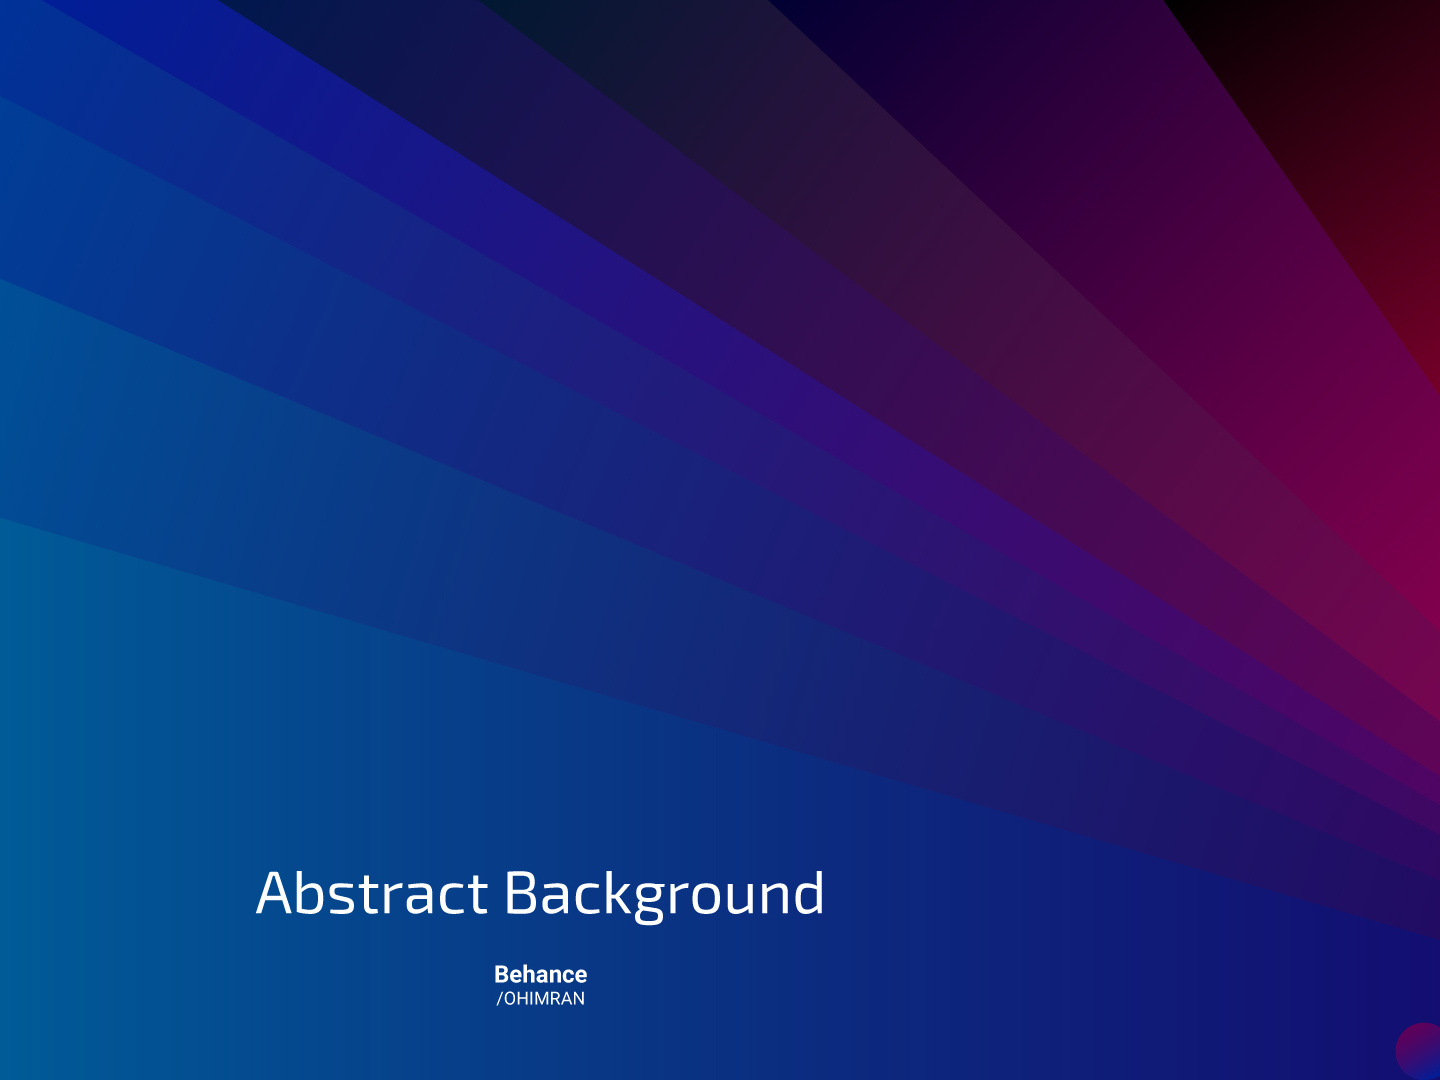 Abstract Background Design In Adobe Illustrator By Oh Imran On